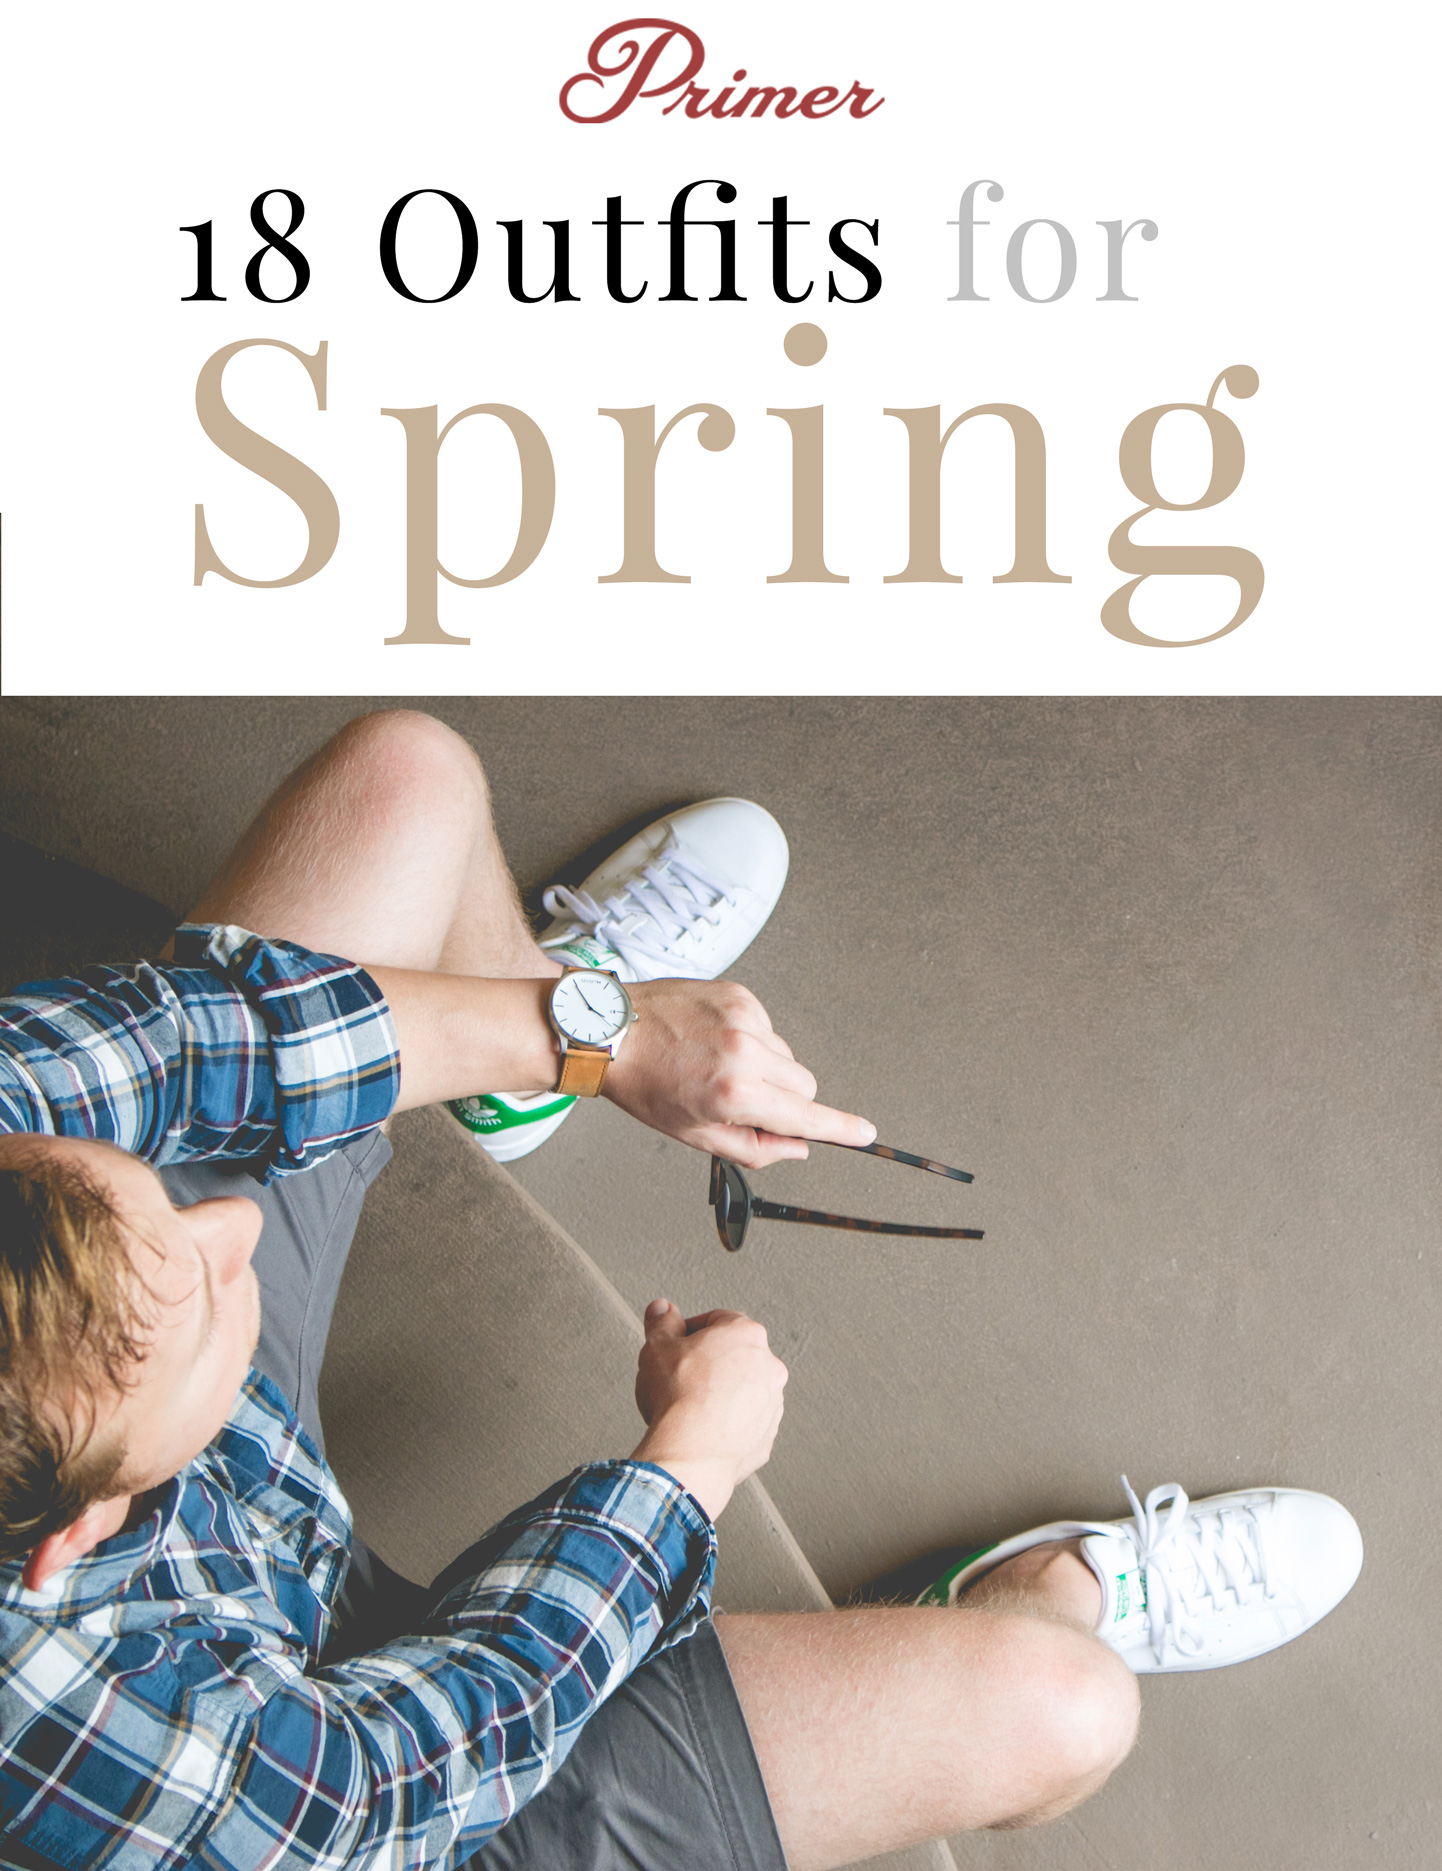 18 Outfits for Spring   Free Men's Style Inspiration Made Easy